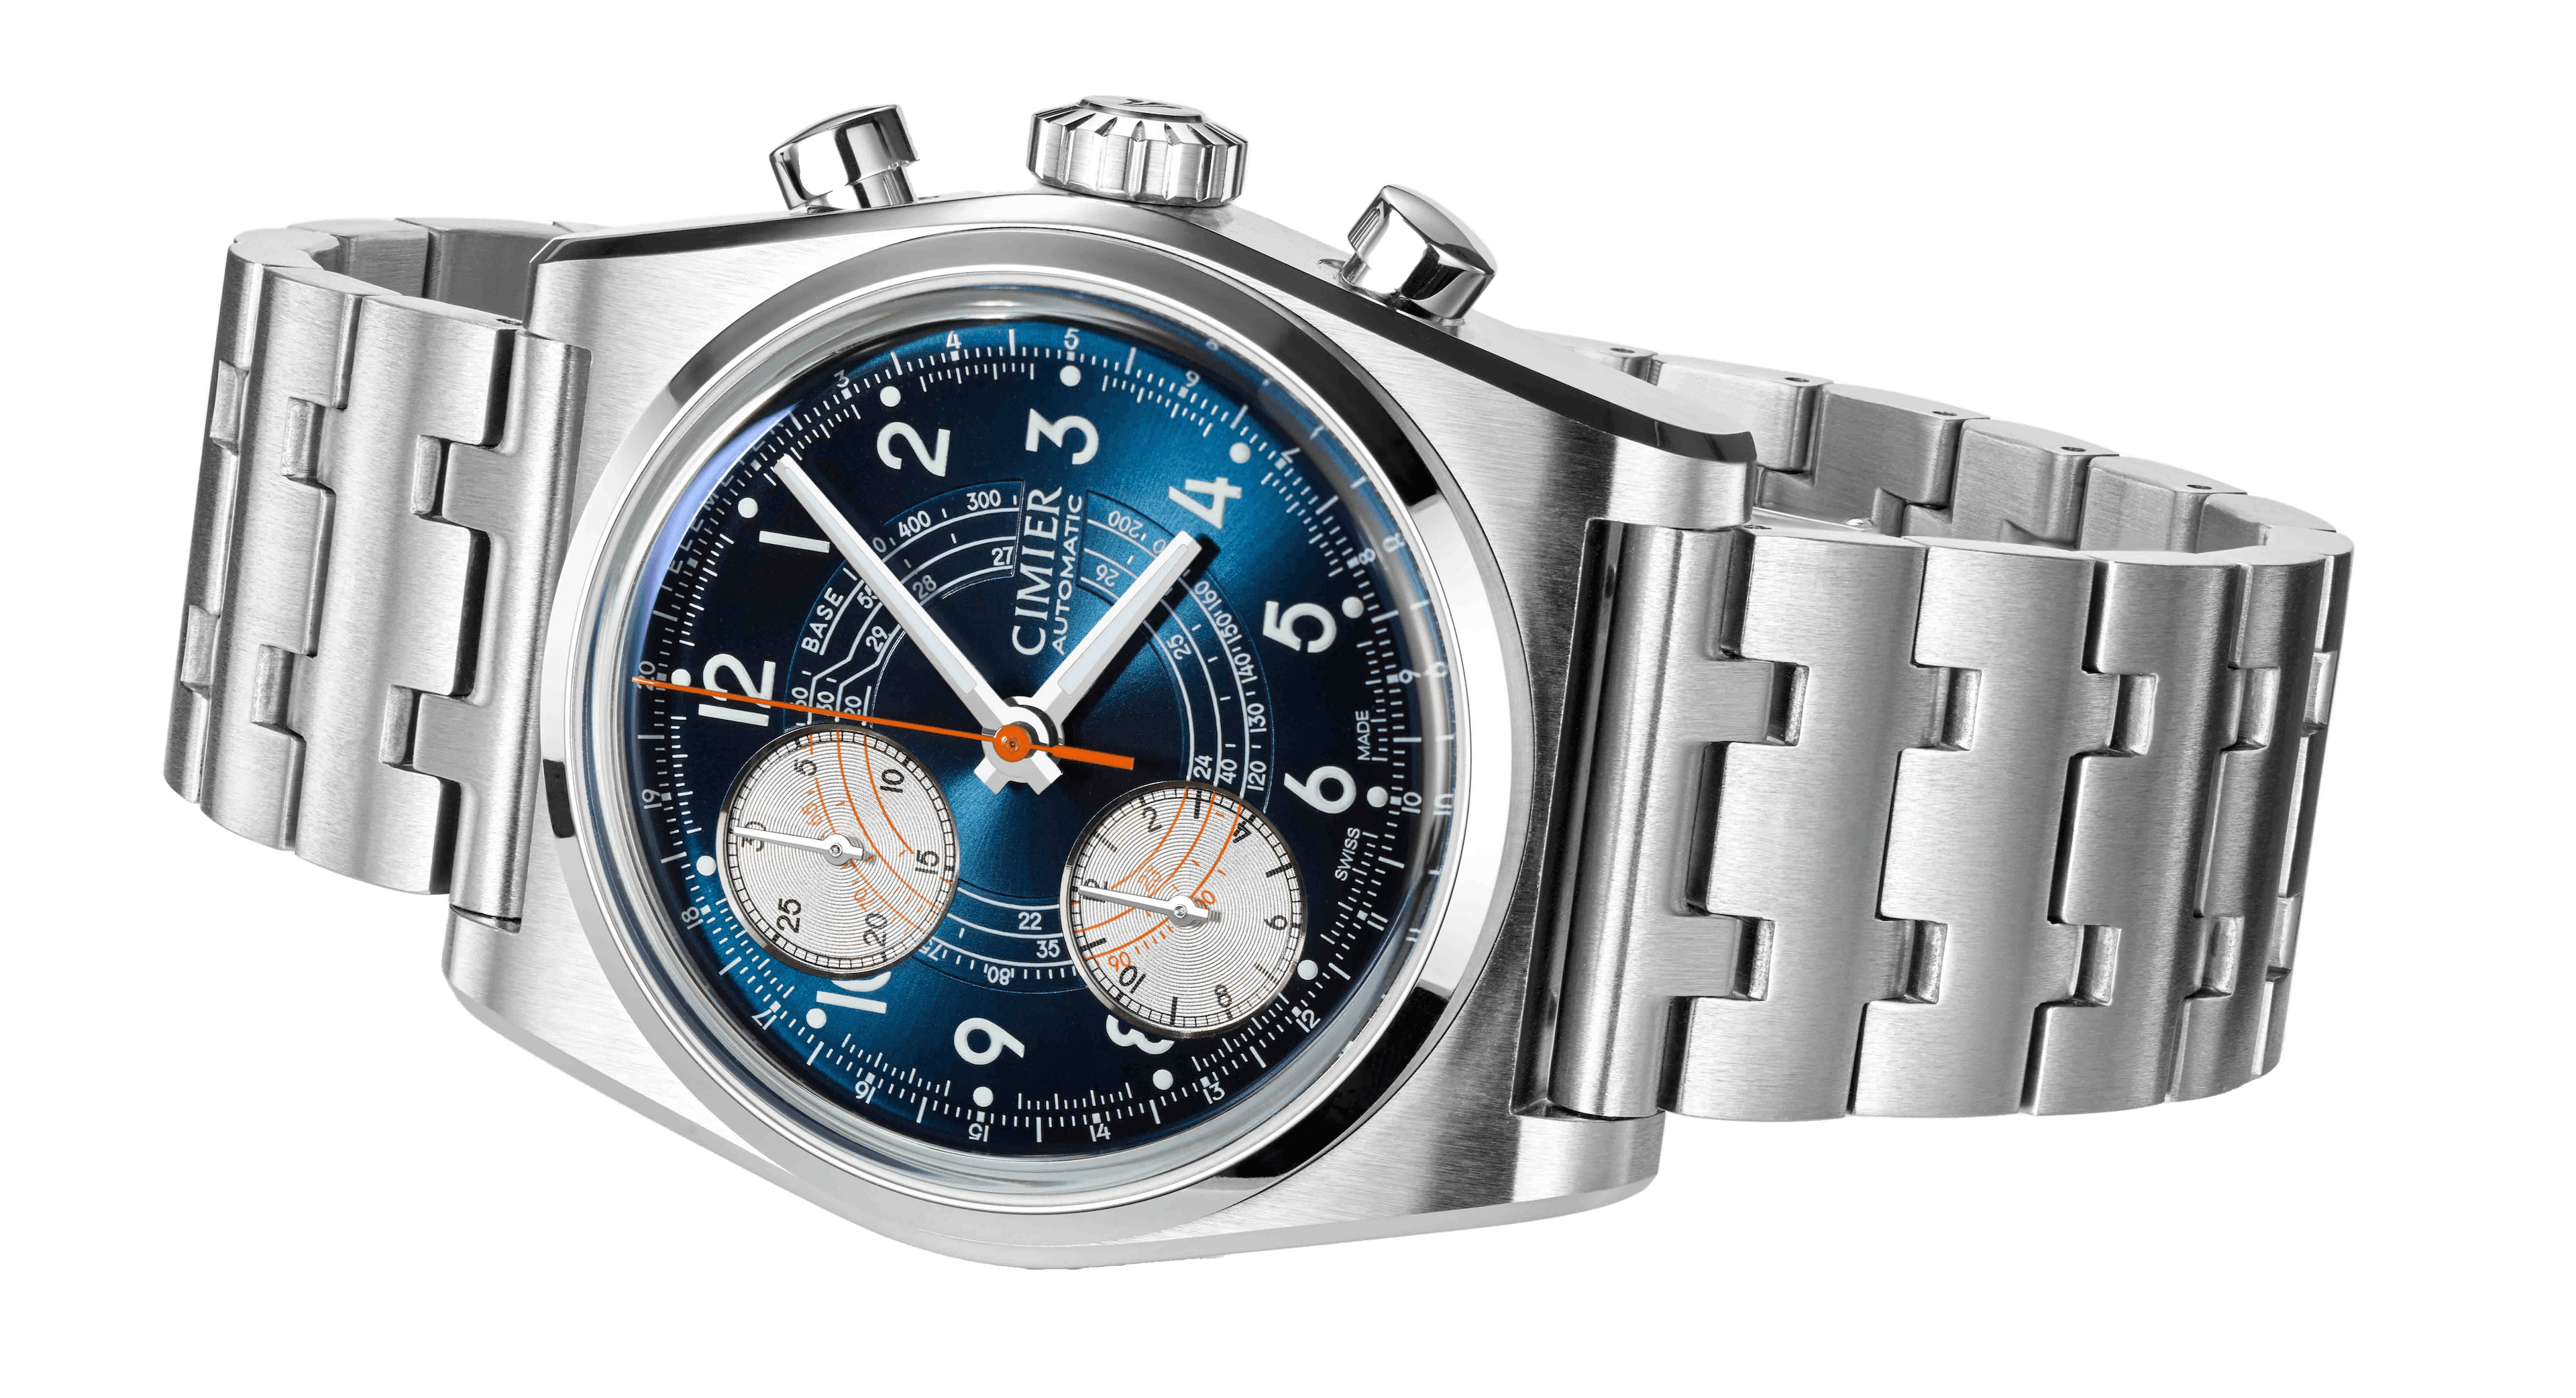 Side view of Cimier 711 Heritage Chronograph wristwatch with blue dial